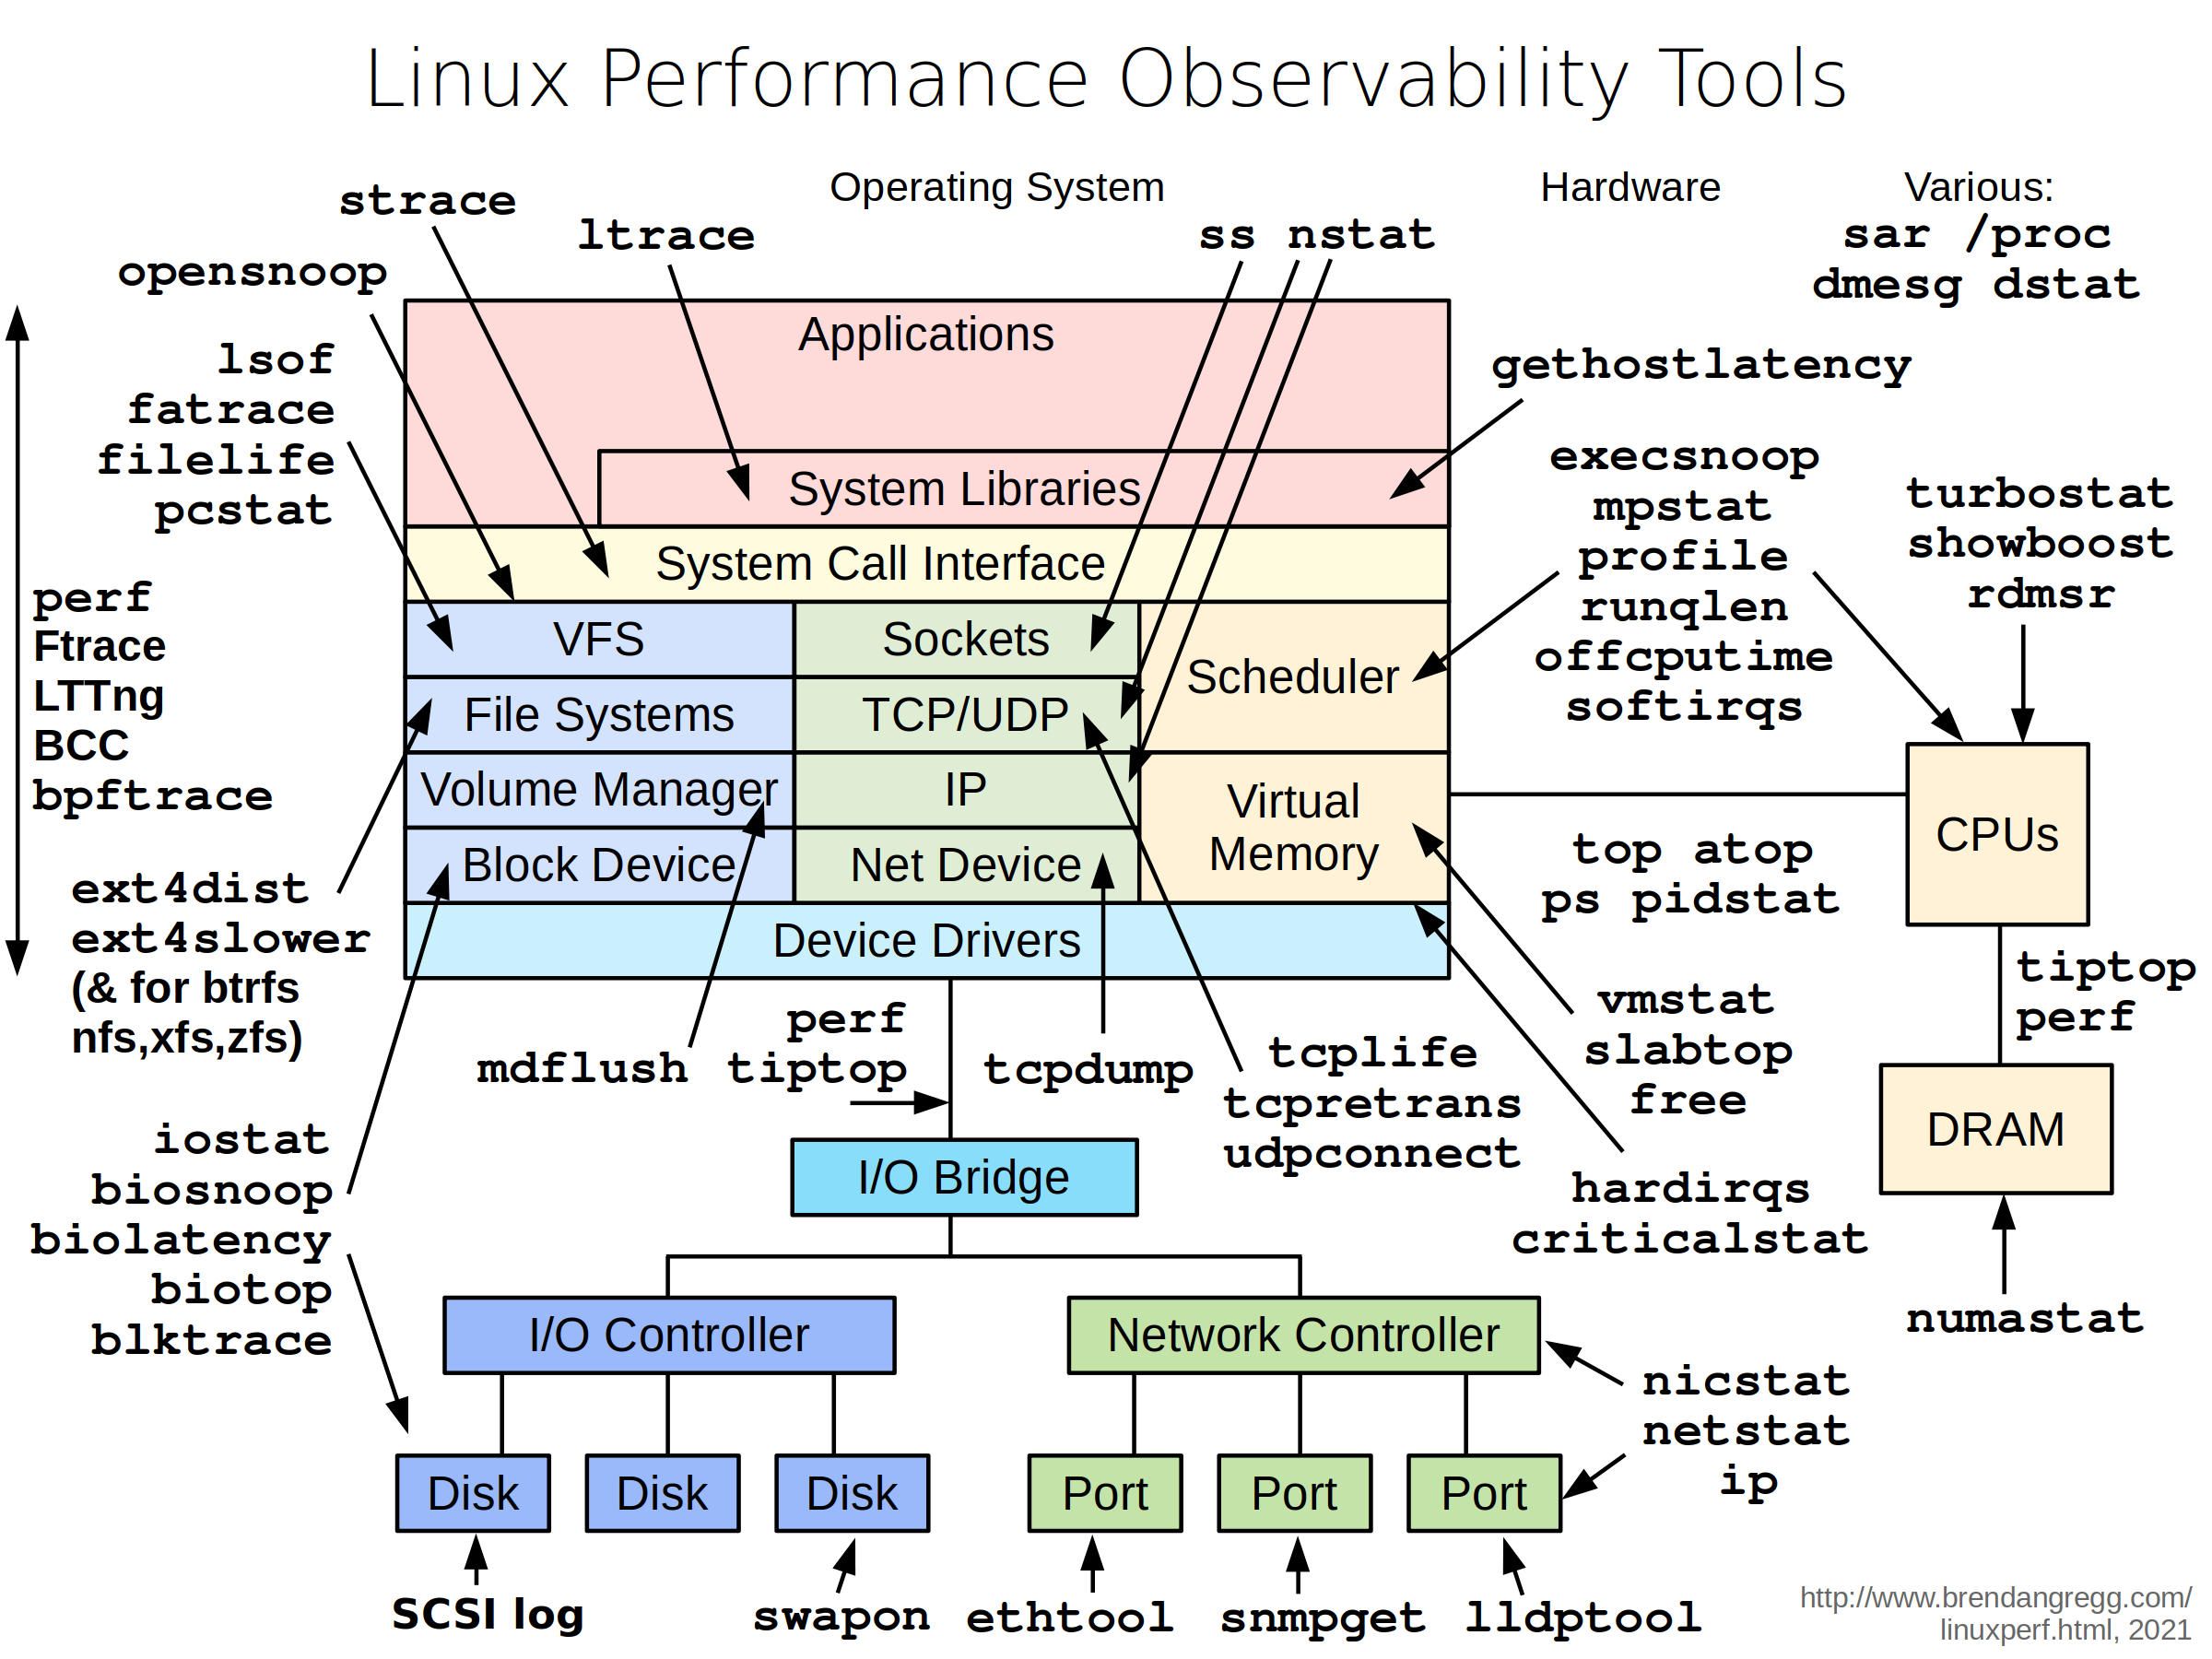 http://www.brendangregg.com/Perf/linux_observability_tools.png